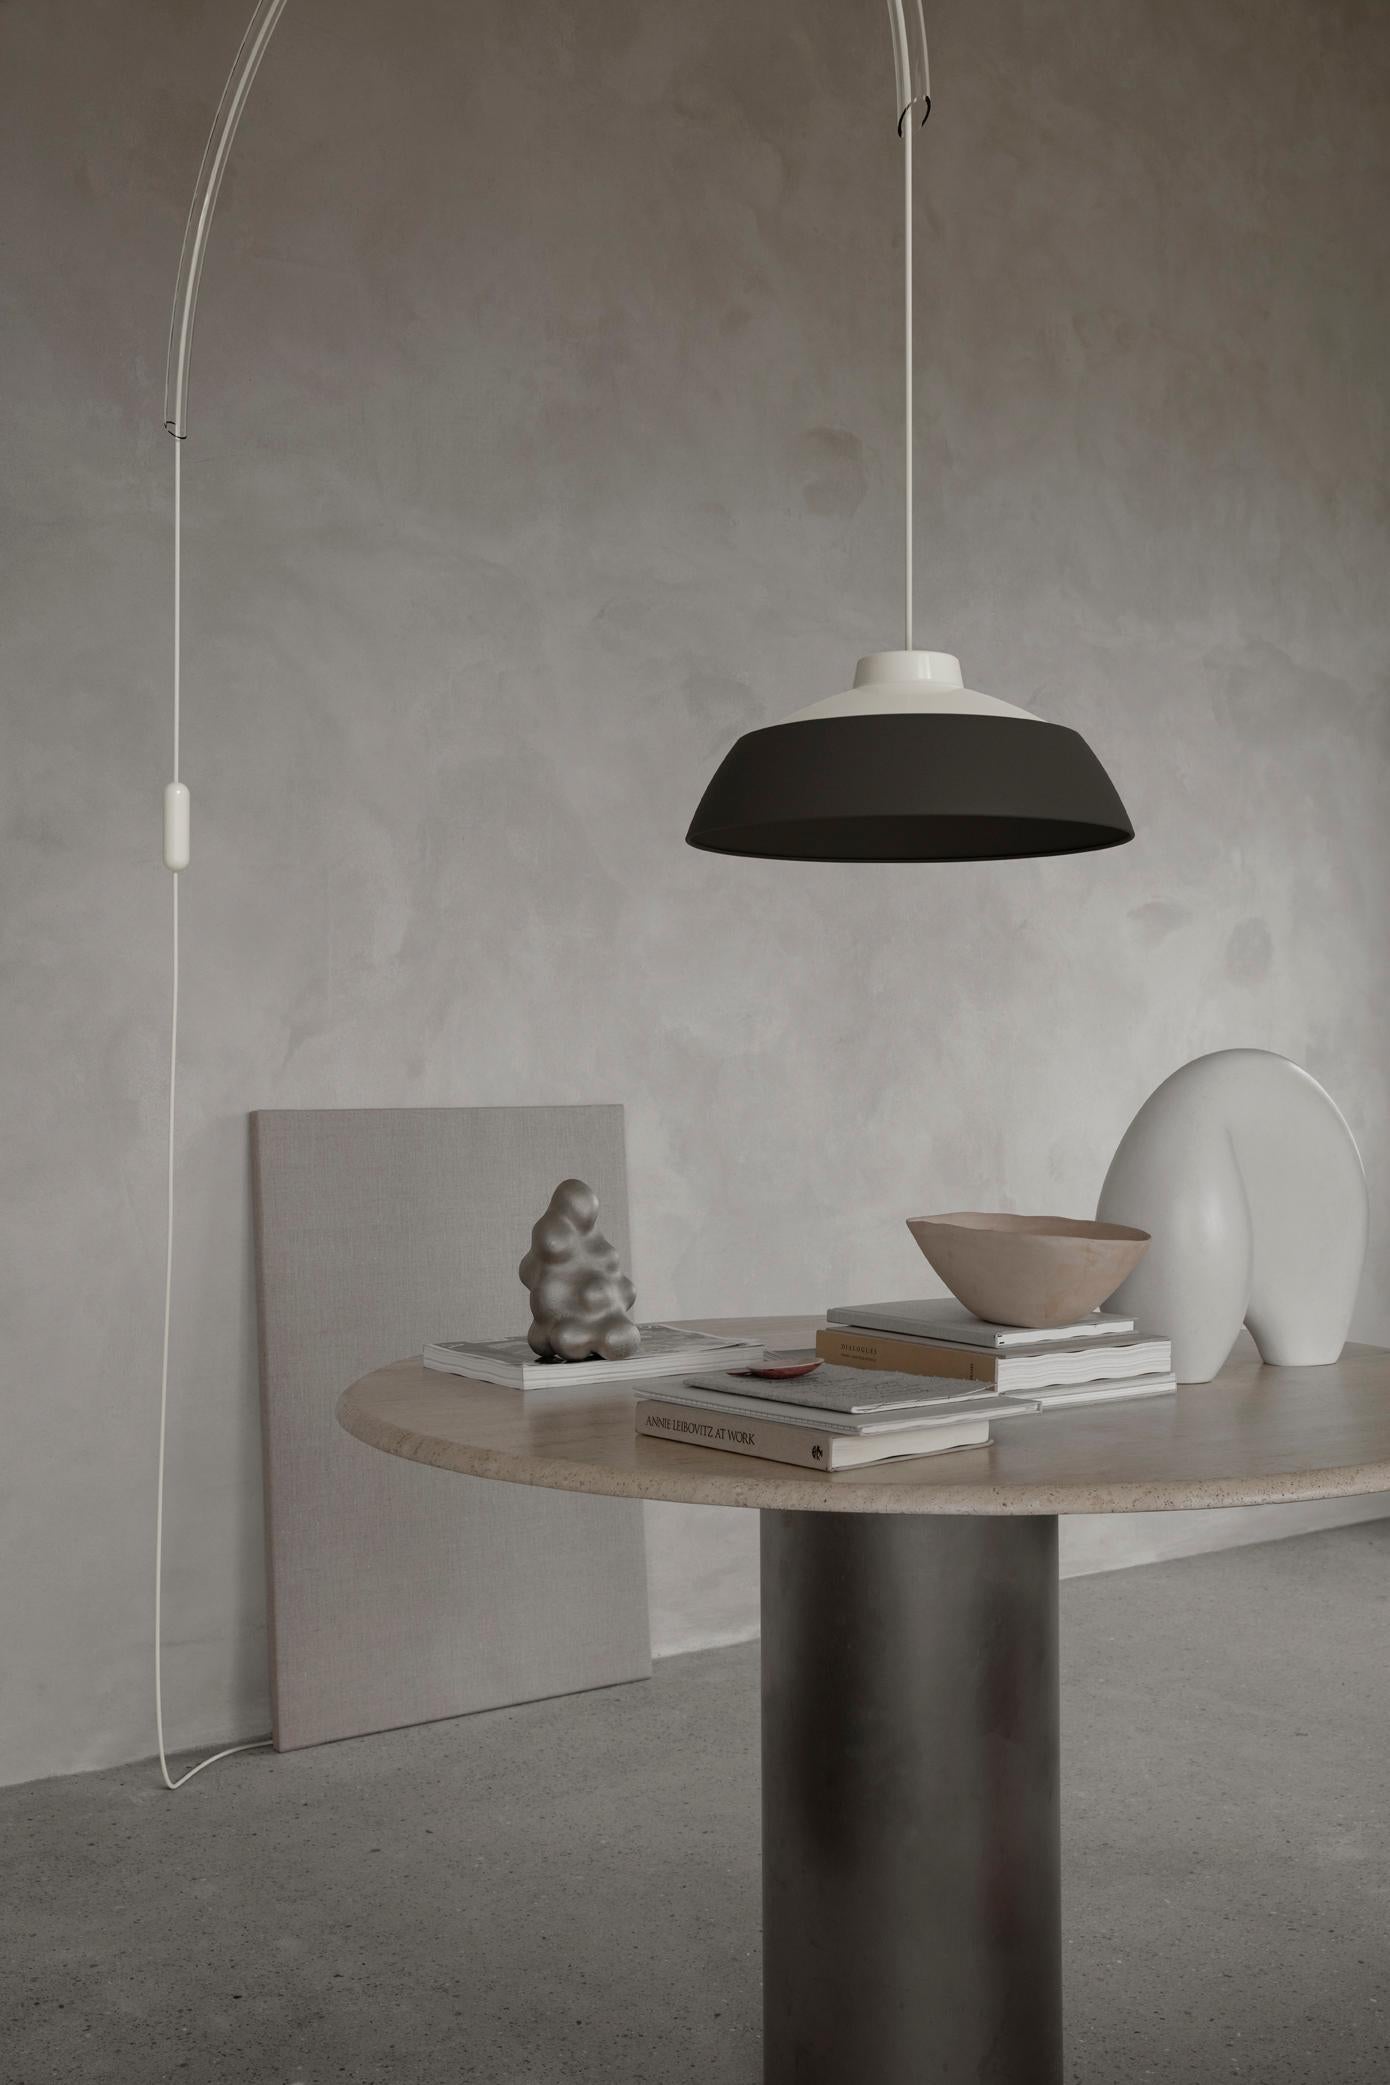 Model 2129
Design by Gino Sarfatti
The droplight Luminaire designed in 1969 is a beautiful example of Gino Sarfatti’s visionary design. A versatile, functional artwork that makes a powerful statement and brings attention to everything its light